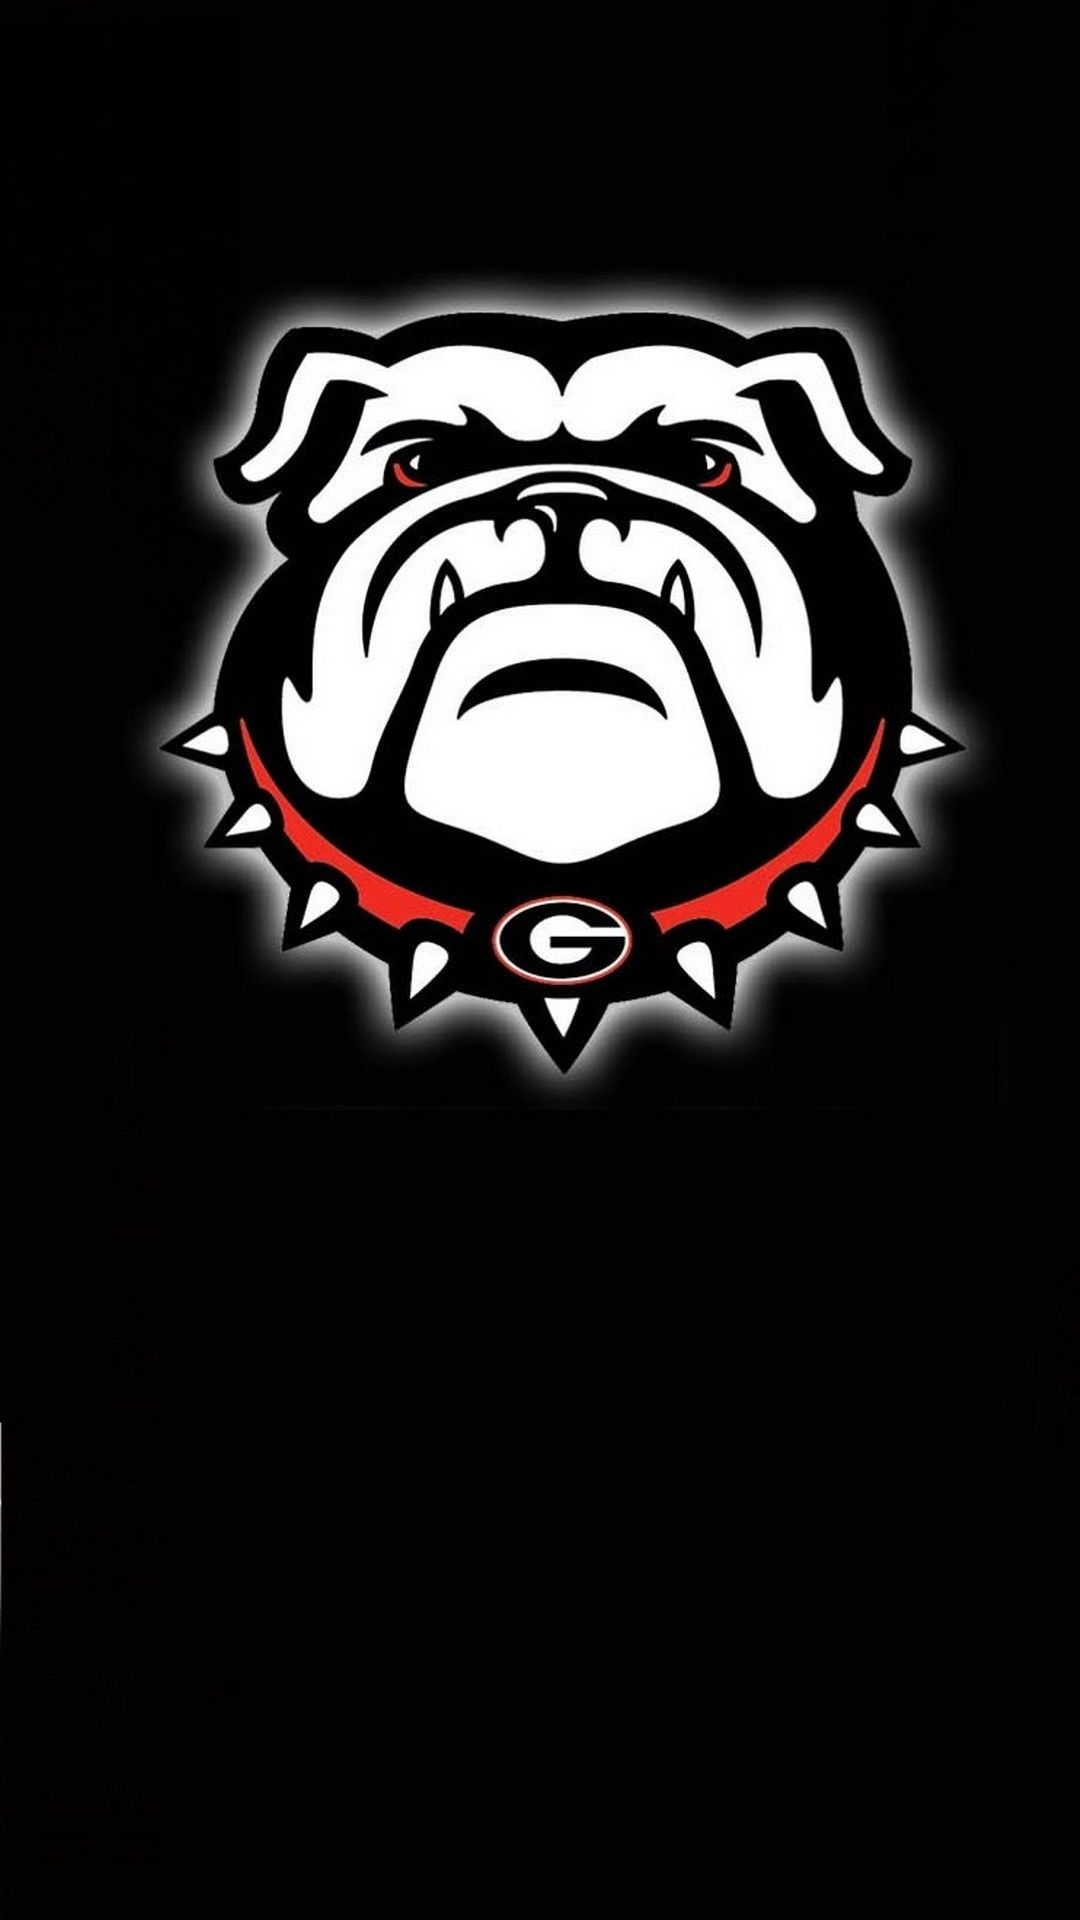 Looking for a good phone wallpaper for the Natty Win. : r/georgiabulldogs